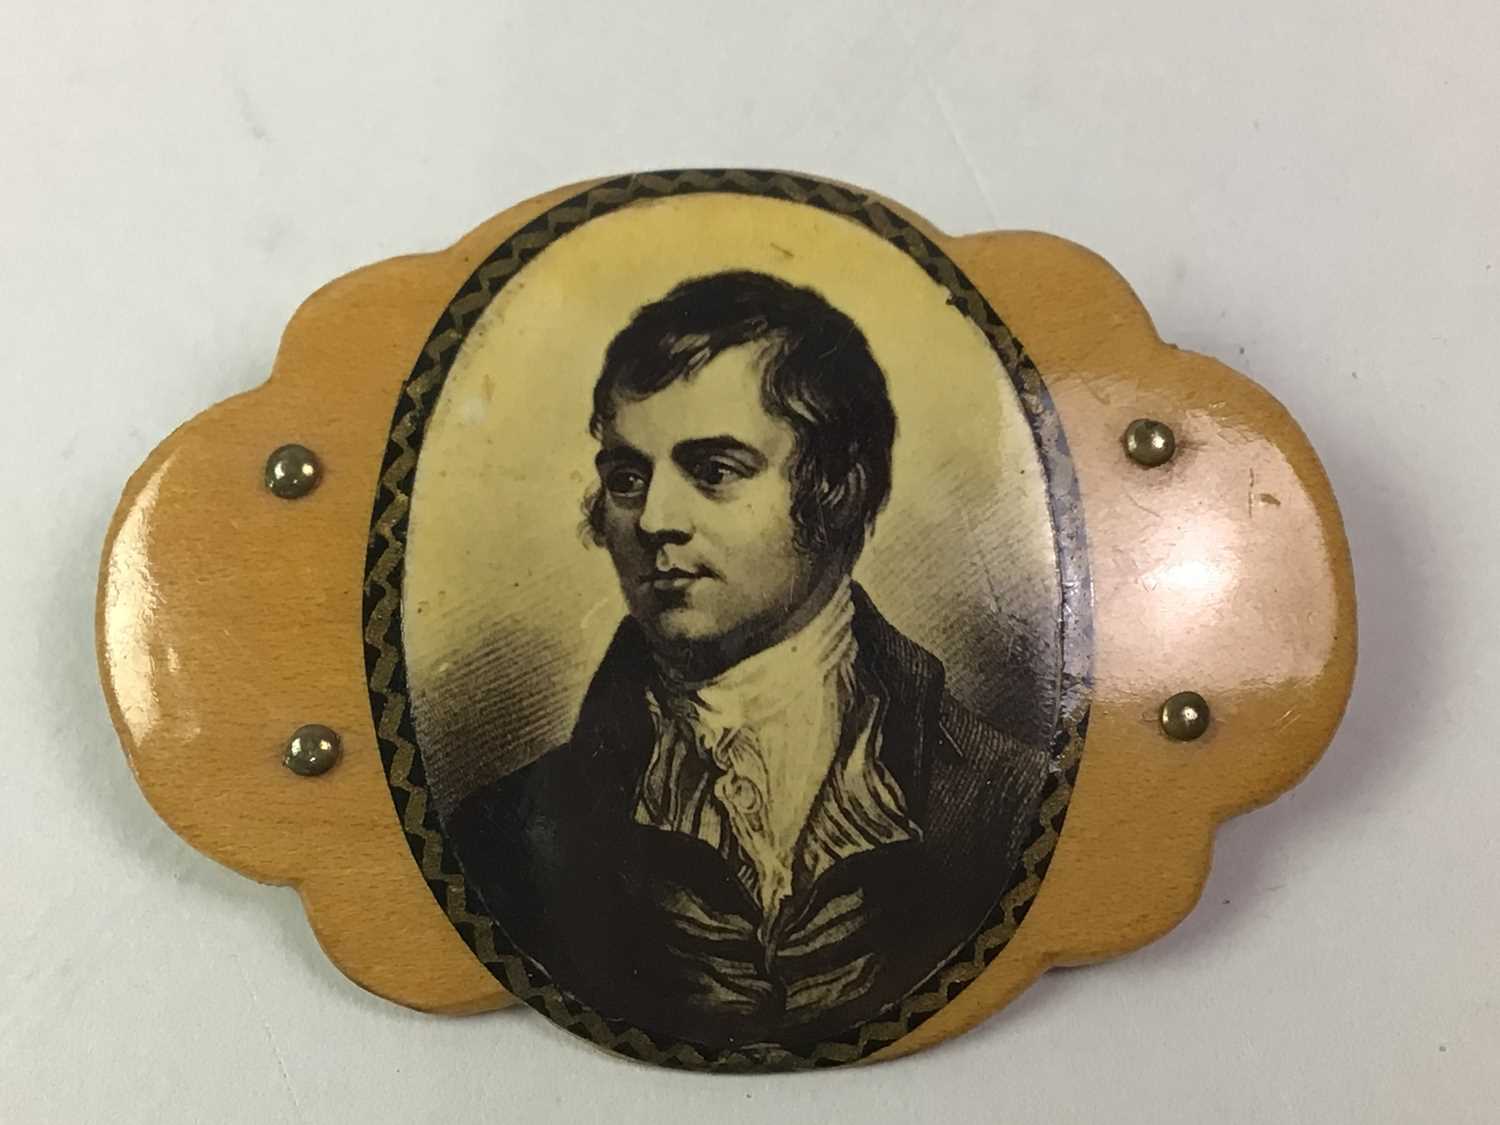 MAUCHLINE ROBERT BURNS BROOCH, ALONG WITH MAUCHLINE BOXES AND NAPKIN RINGS